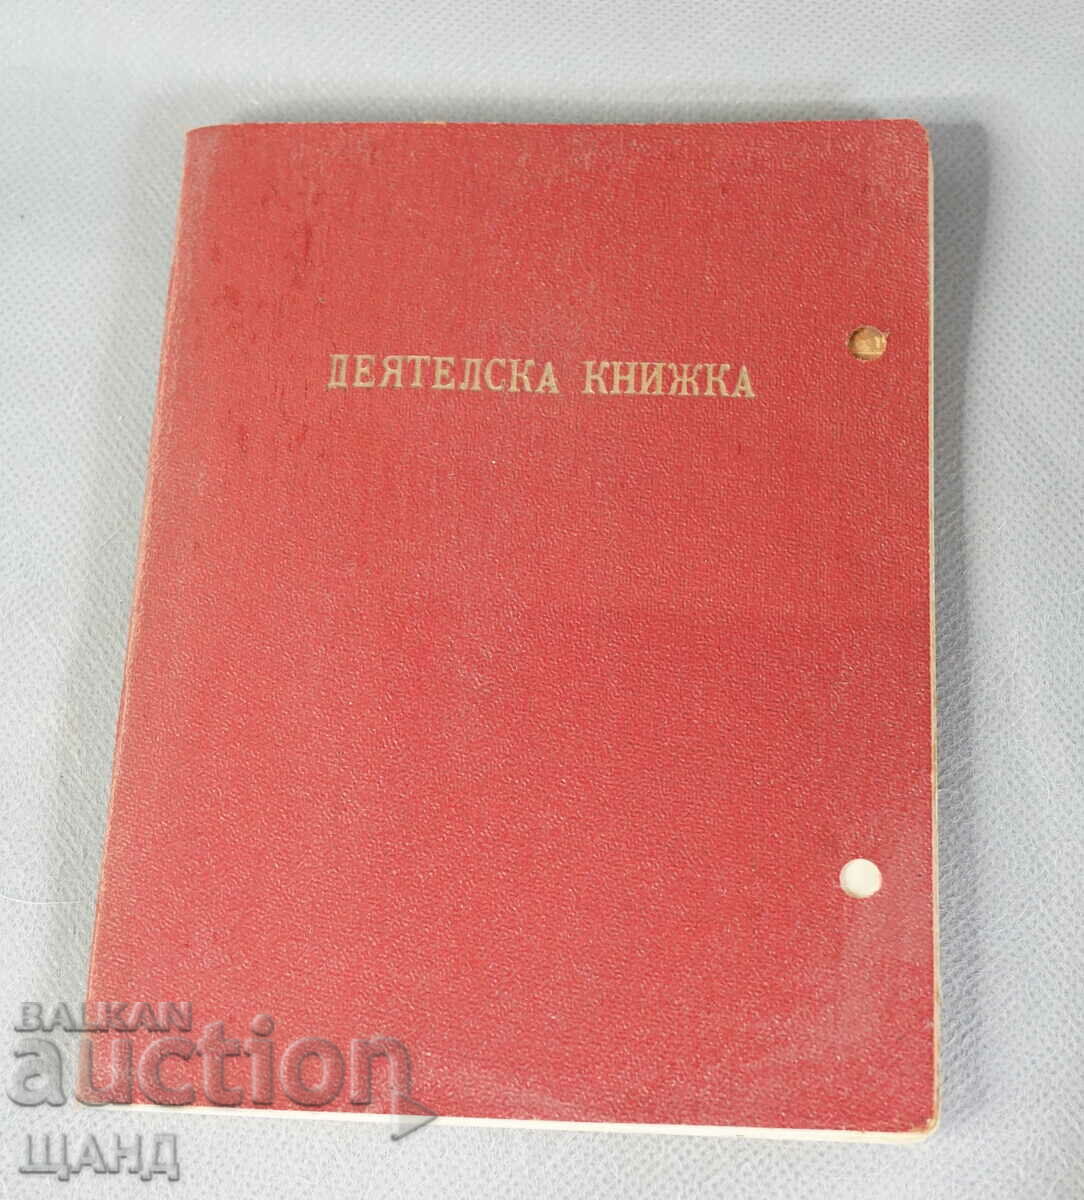 1940 Worker's book document with stamps